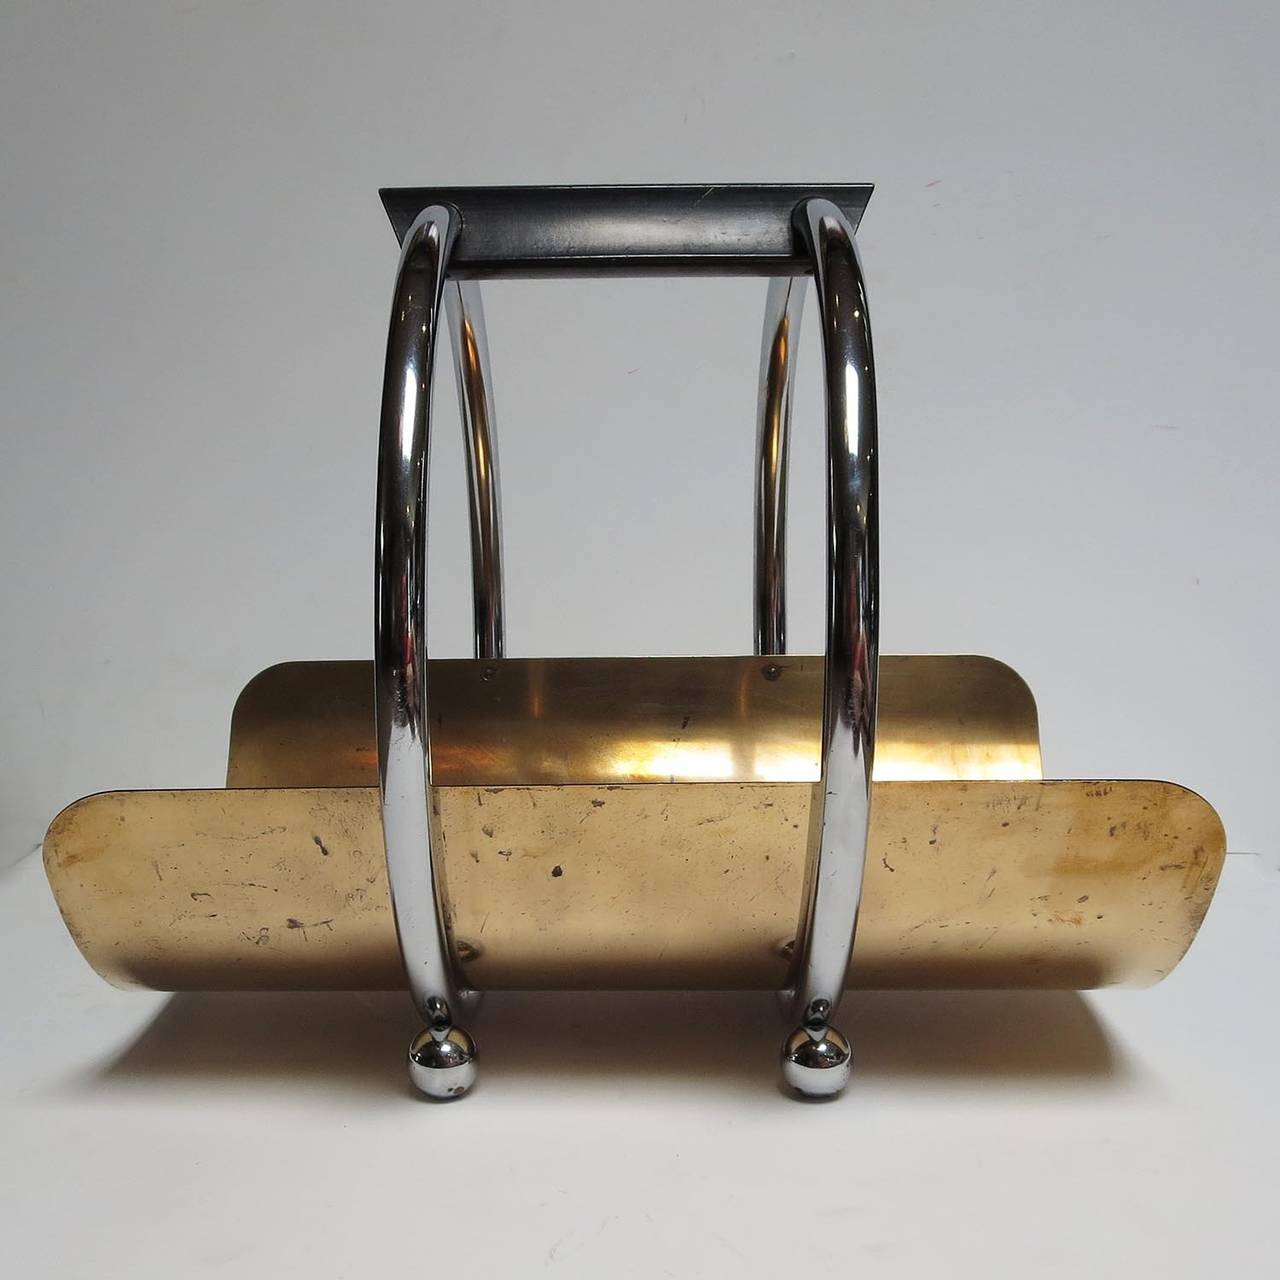 An icon of modern Art Deco design, this stylized log holder is often misattributed to Norman Bel Geddes. It was designed by Leslie Beaton for the Revere Copper and Chrome Company in 1936.The belly of the holder is a single sheet of copper-plated